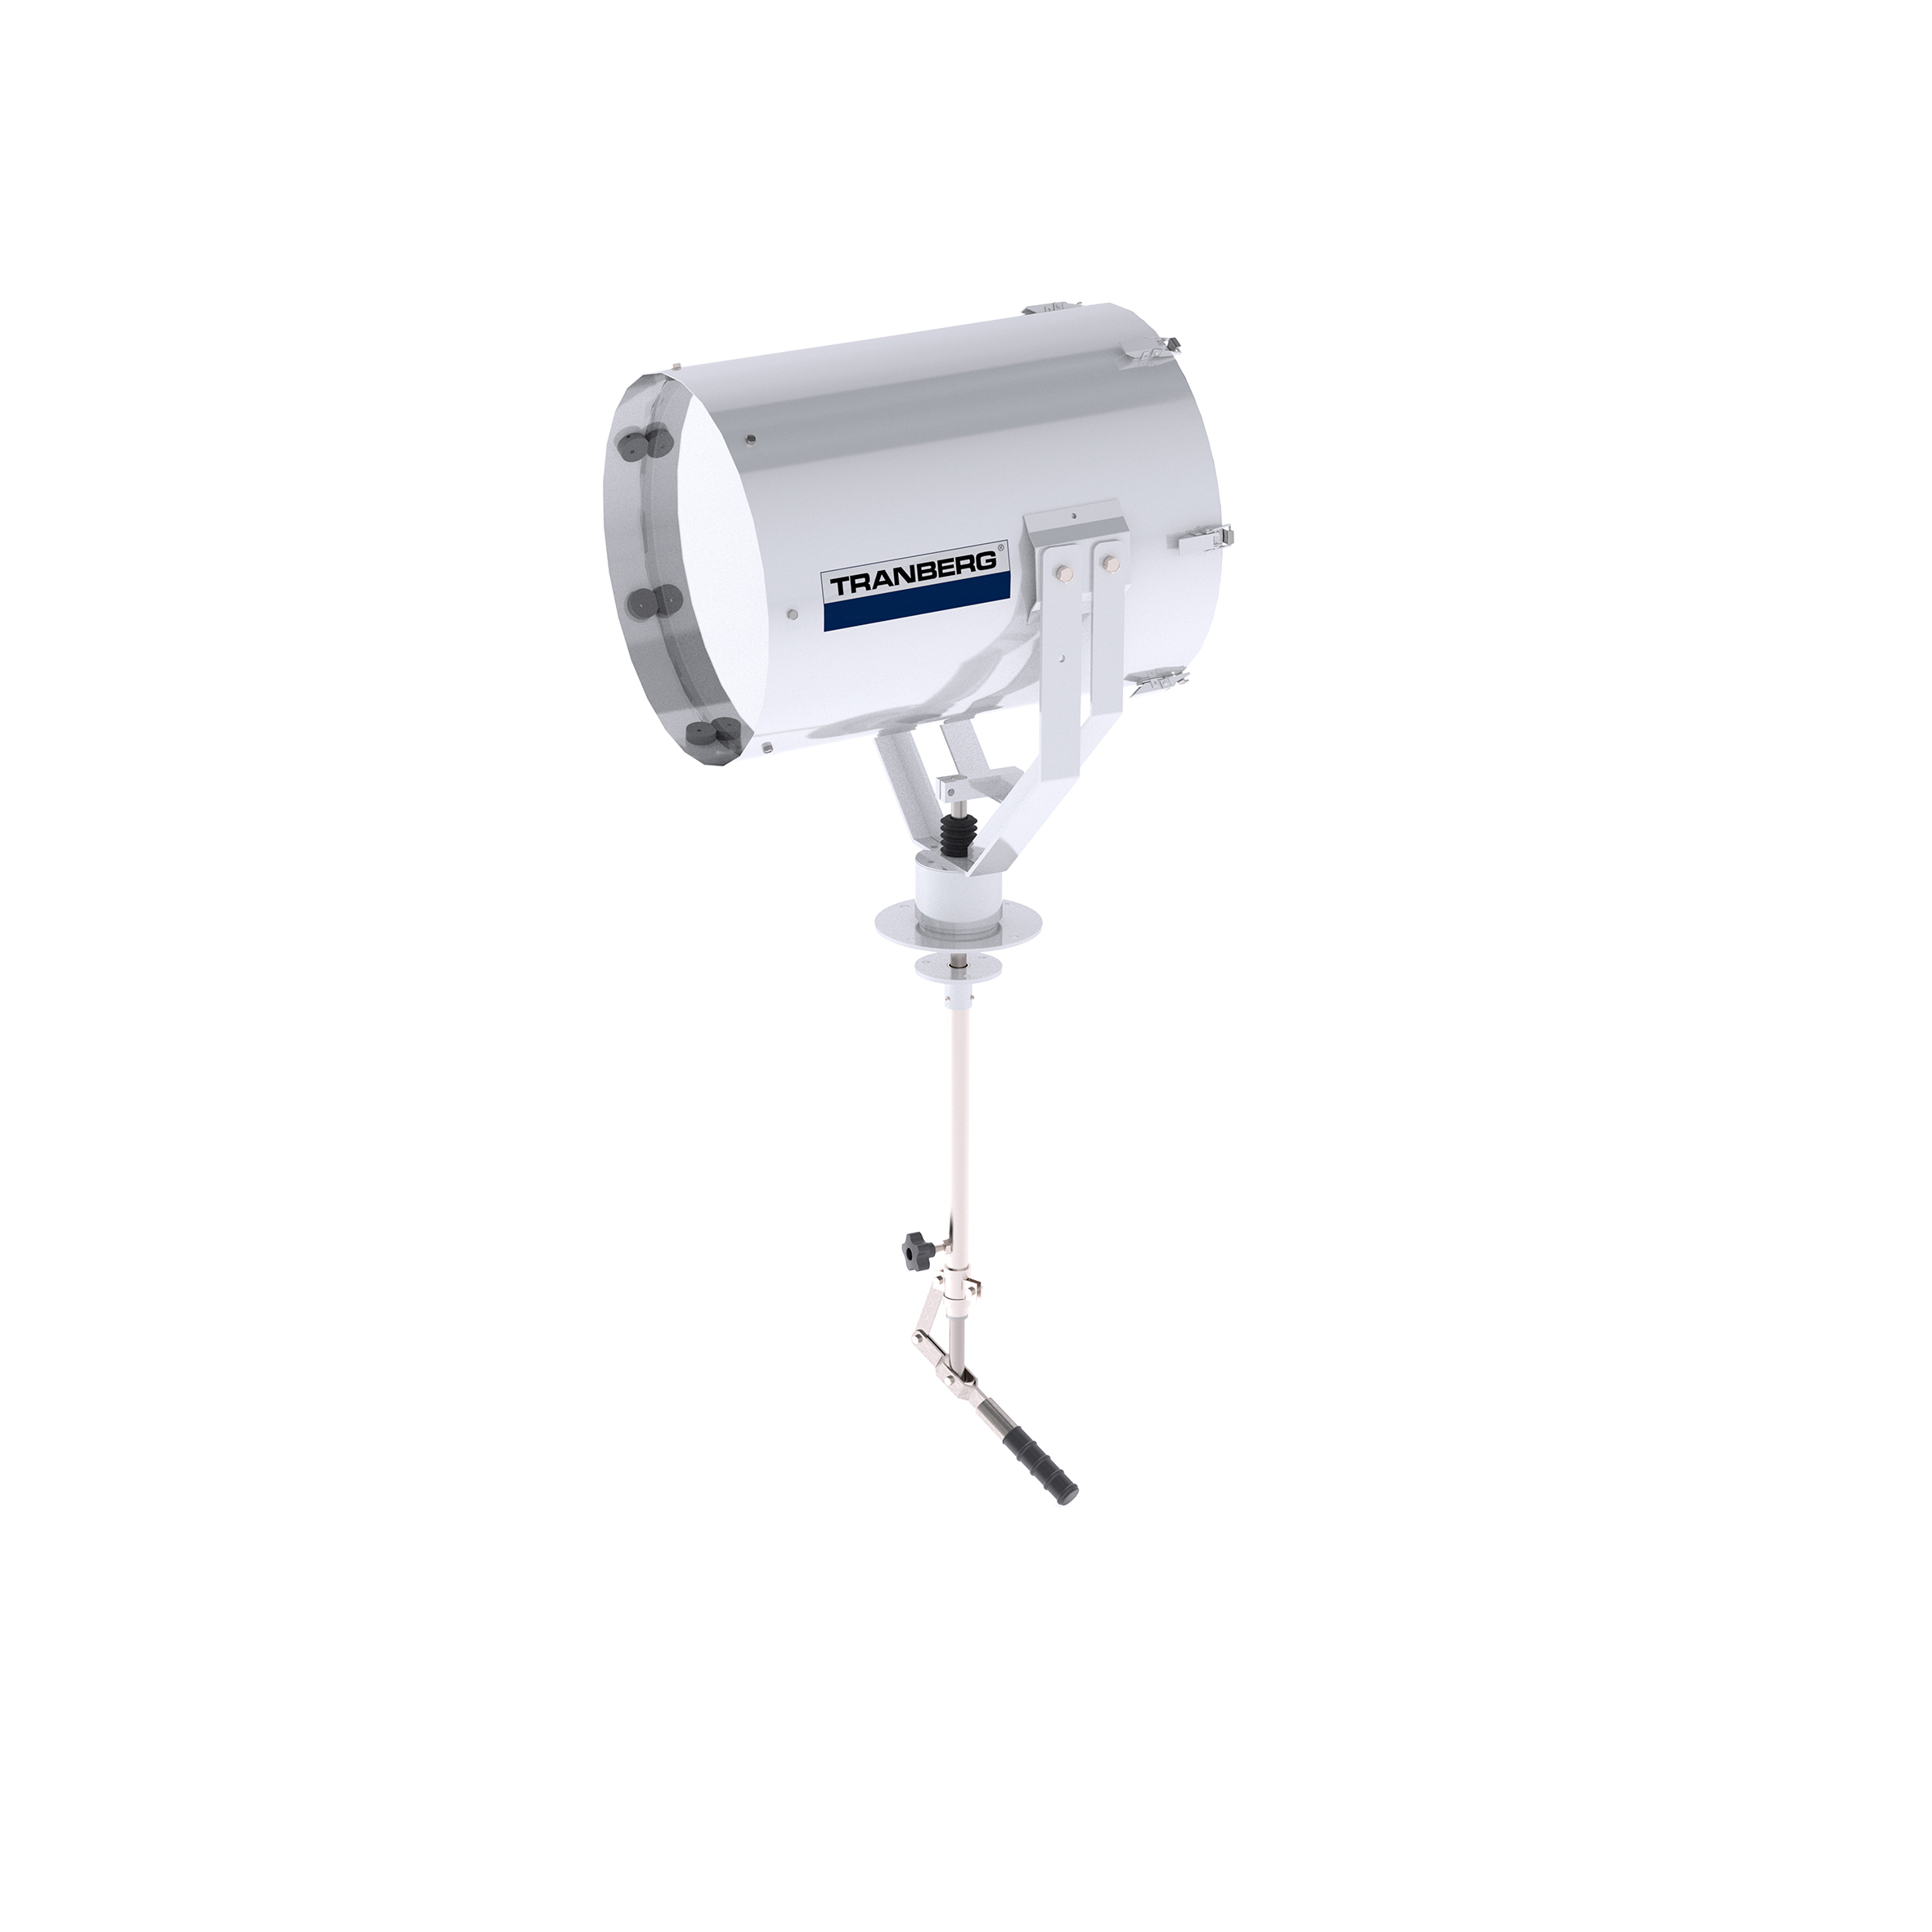 TEF 2630 Searchlight: Halogen 2000W bulb incl, 230V, Bridge Controlled, Stainless Steel photo